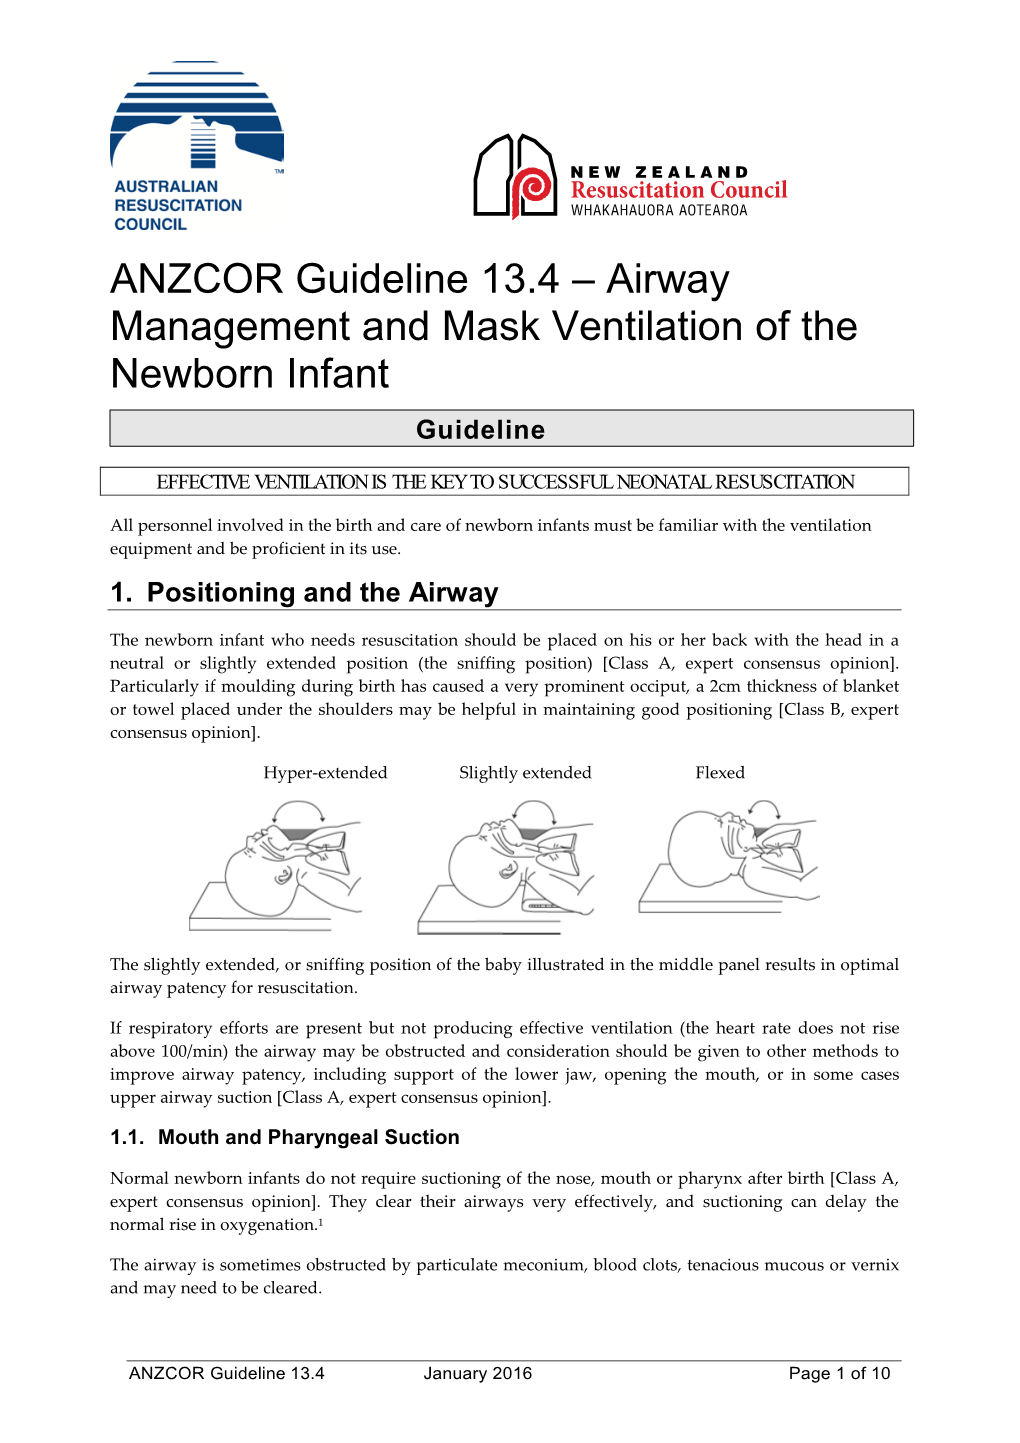 ANZCOR Guideline 13.4 – Airway Management and Mask Ventilation of the Newborn Infant